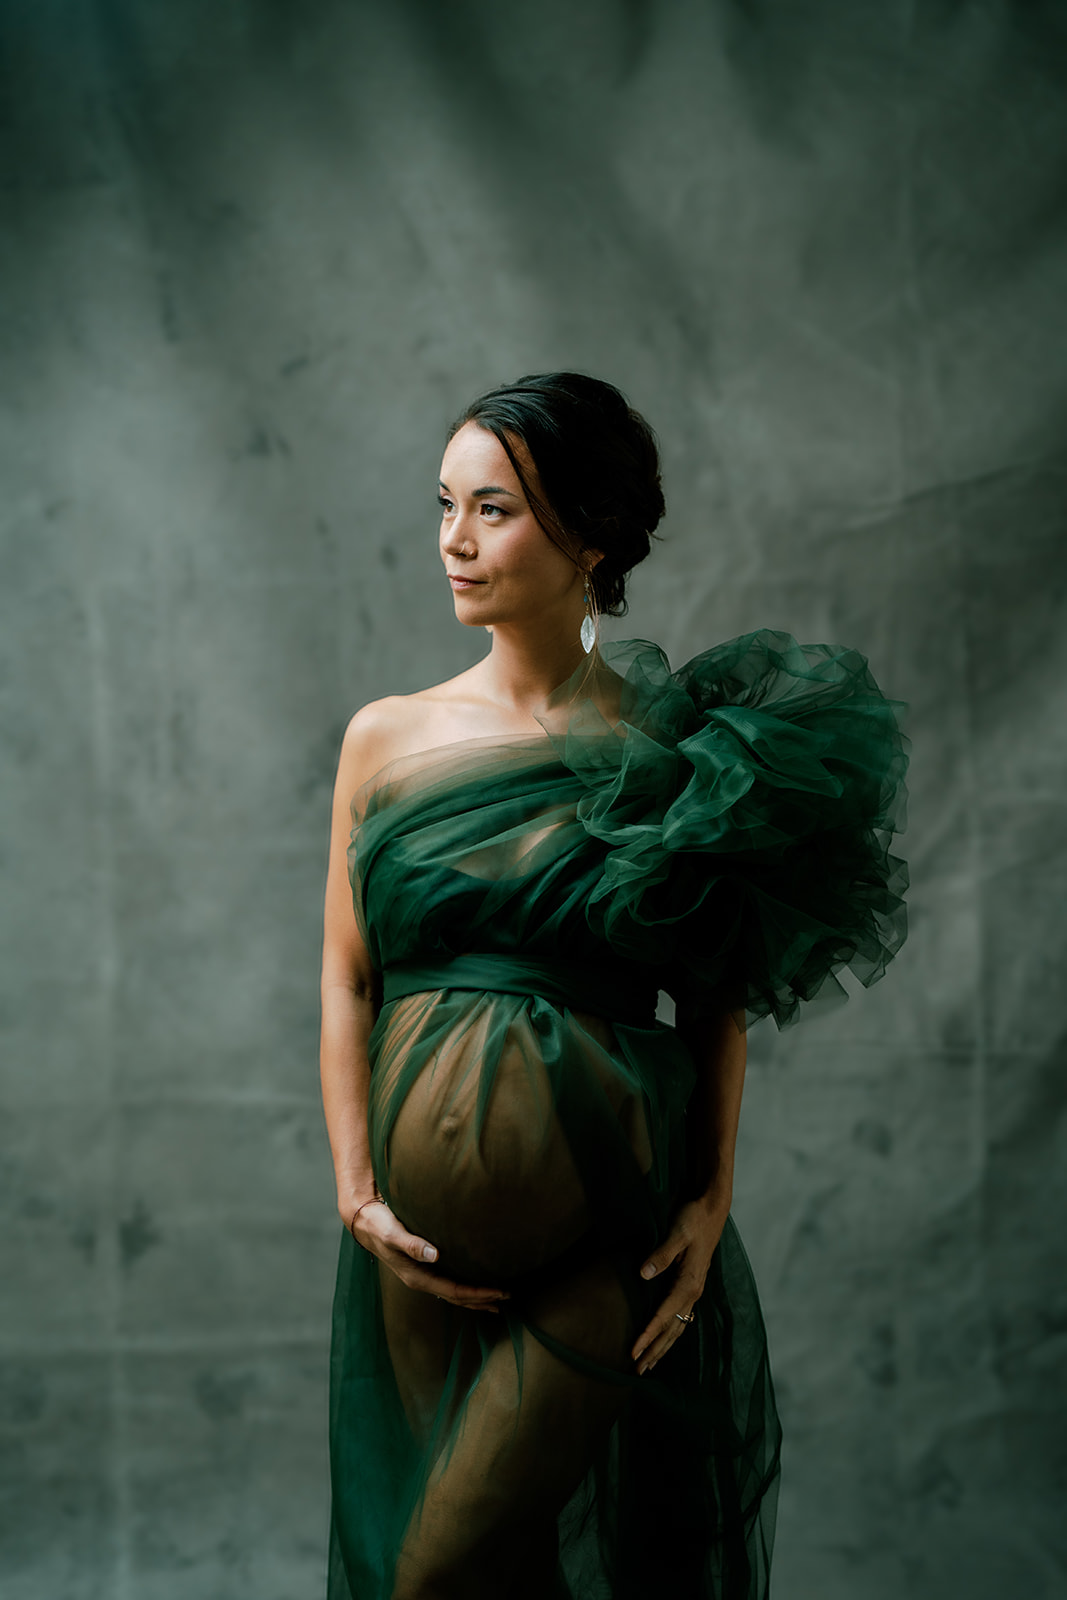 A pregnant woman in an emerald gown posing for a photo.